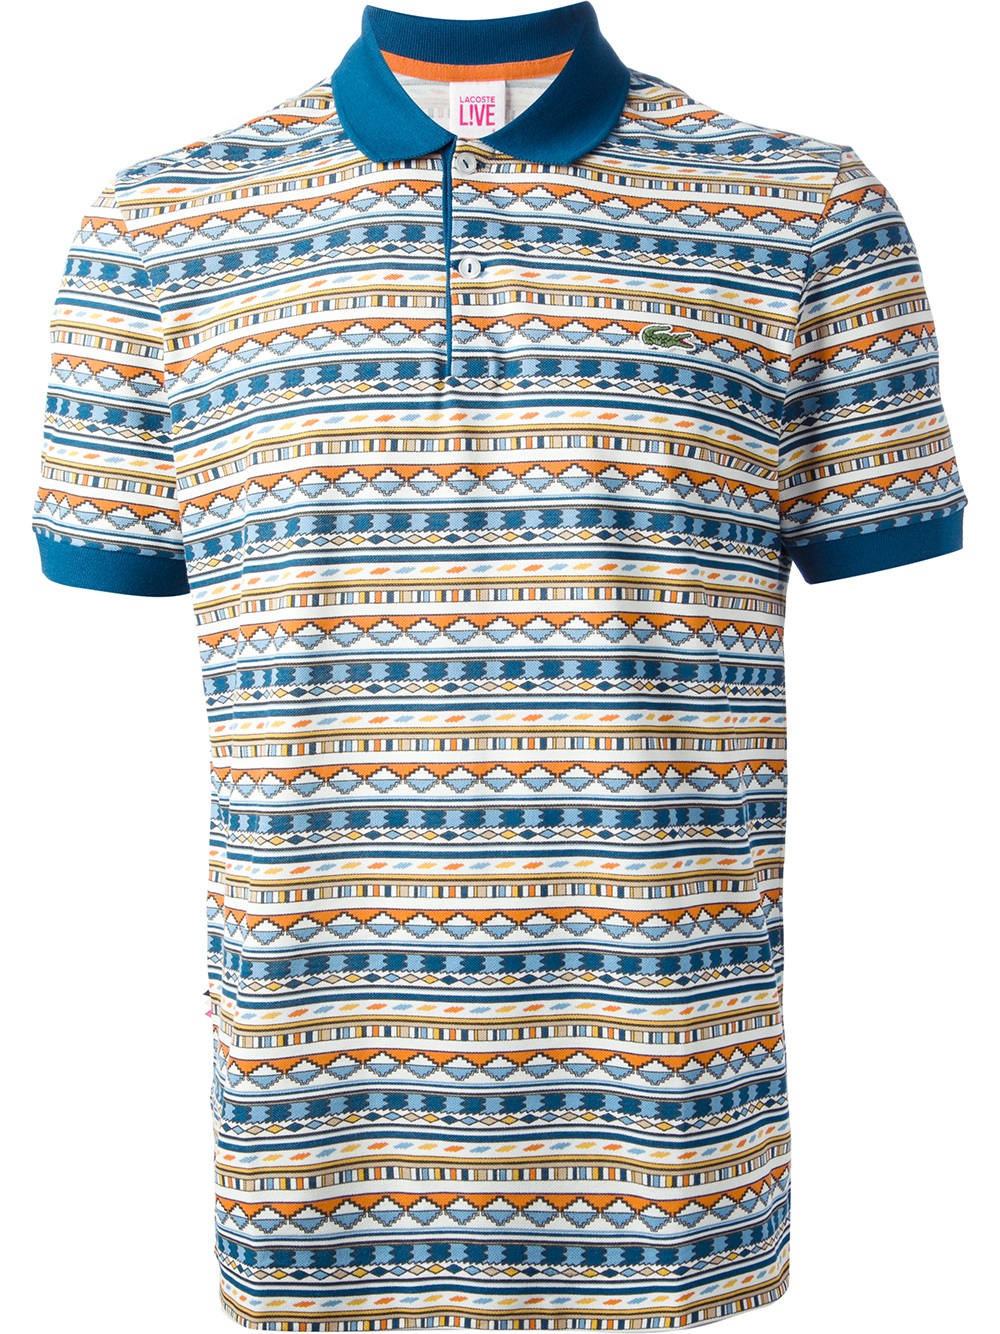 Lyst - Lacoste l!ive Patterned Polo Shirt for Men